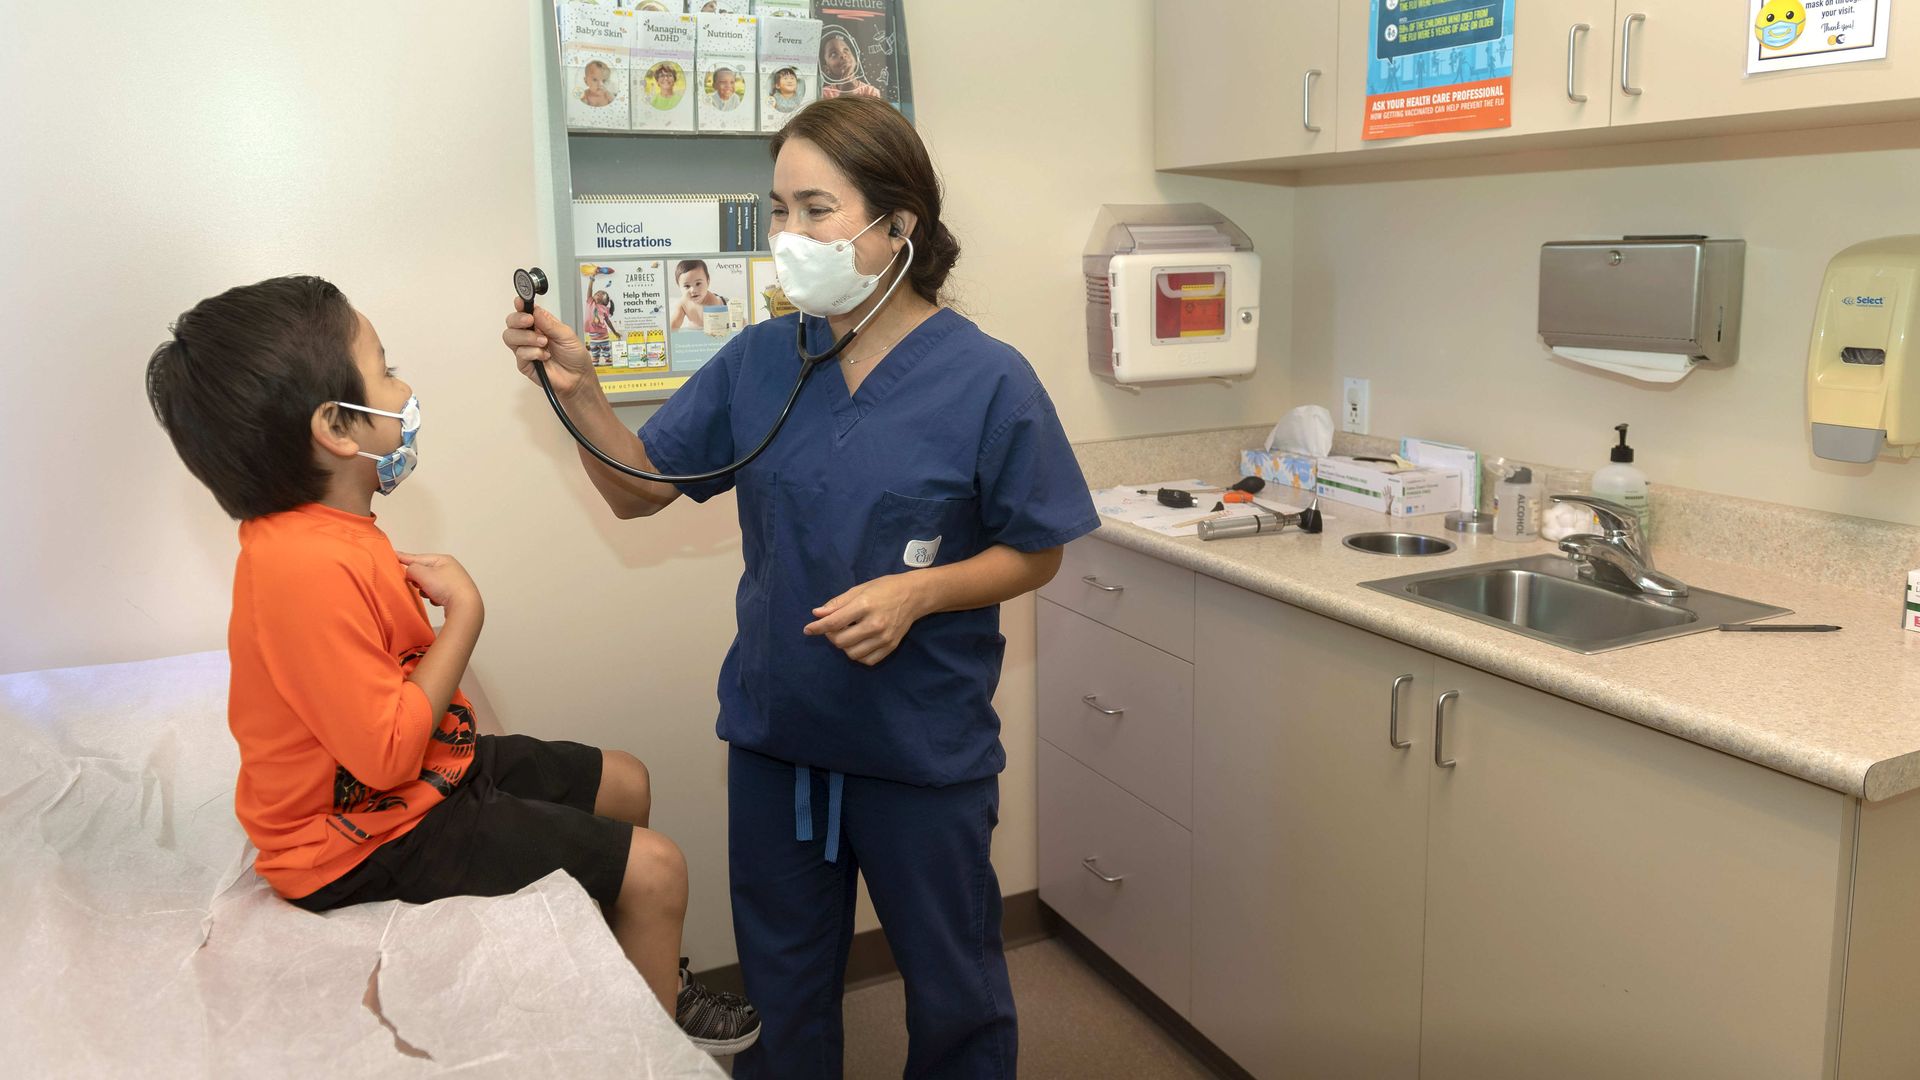 : Dr. Kate Williamson examines a child during a yearly routine exam at Southern Orange County Pediatric Associates in Ladera Ranch, CA on Tuesday, July 28, 2020